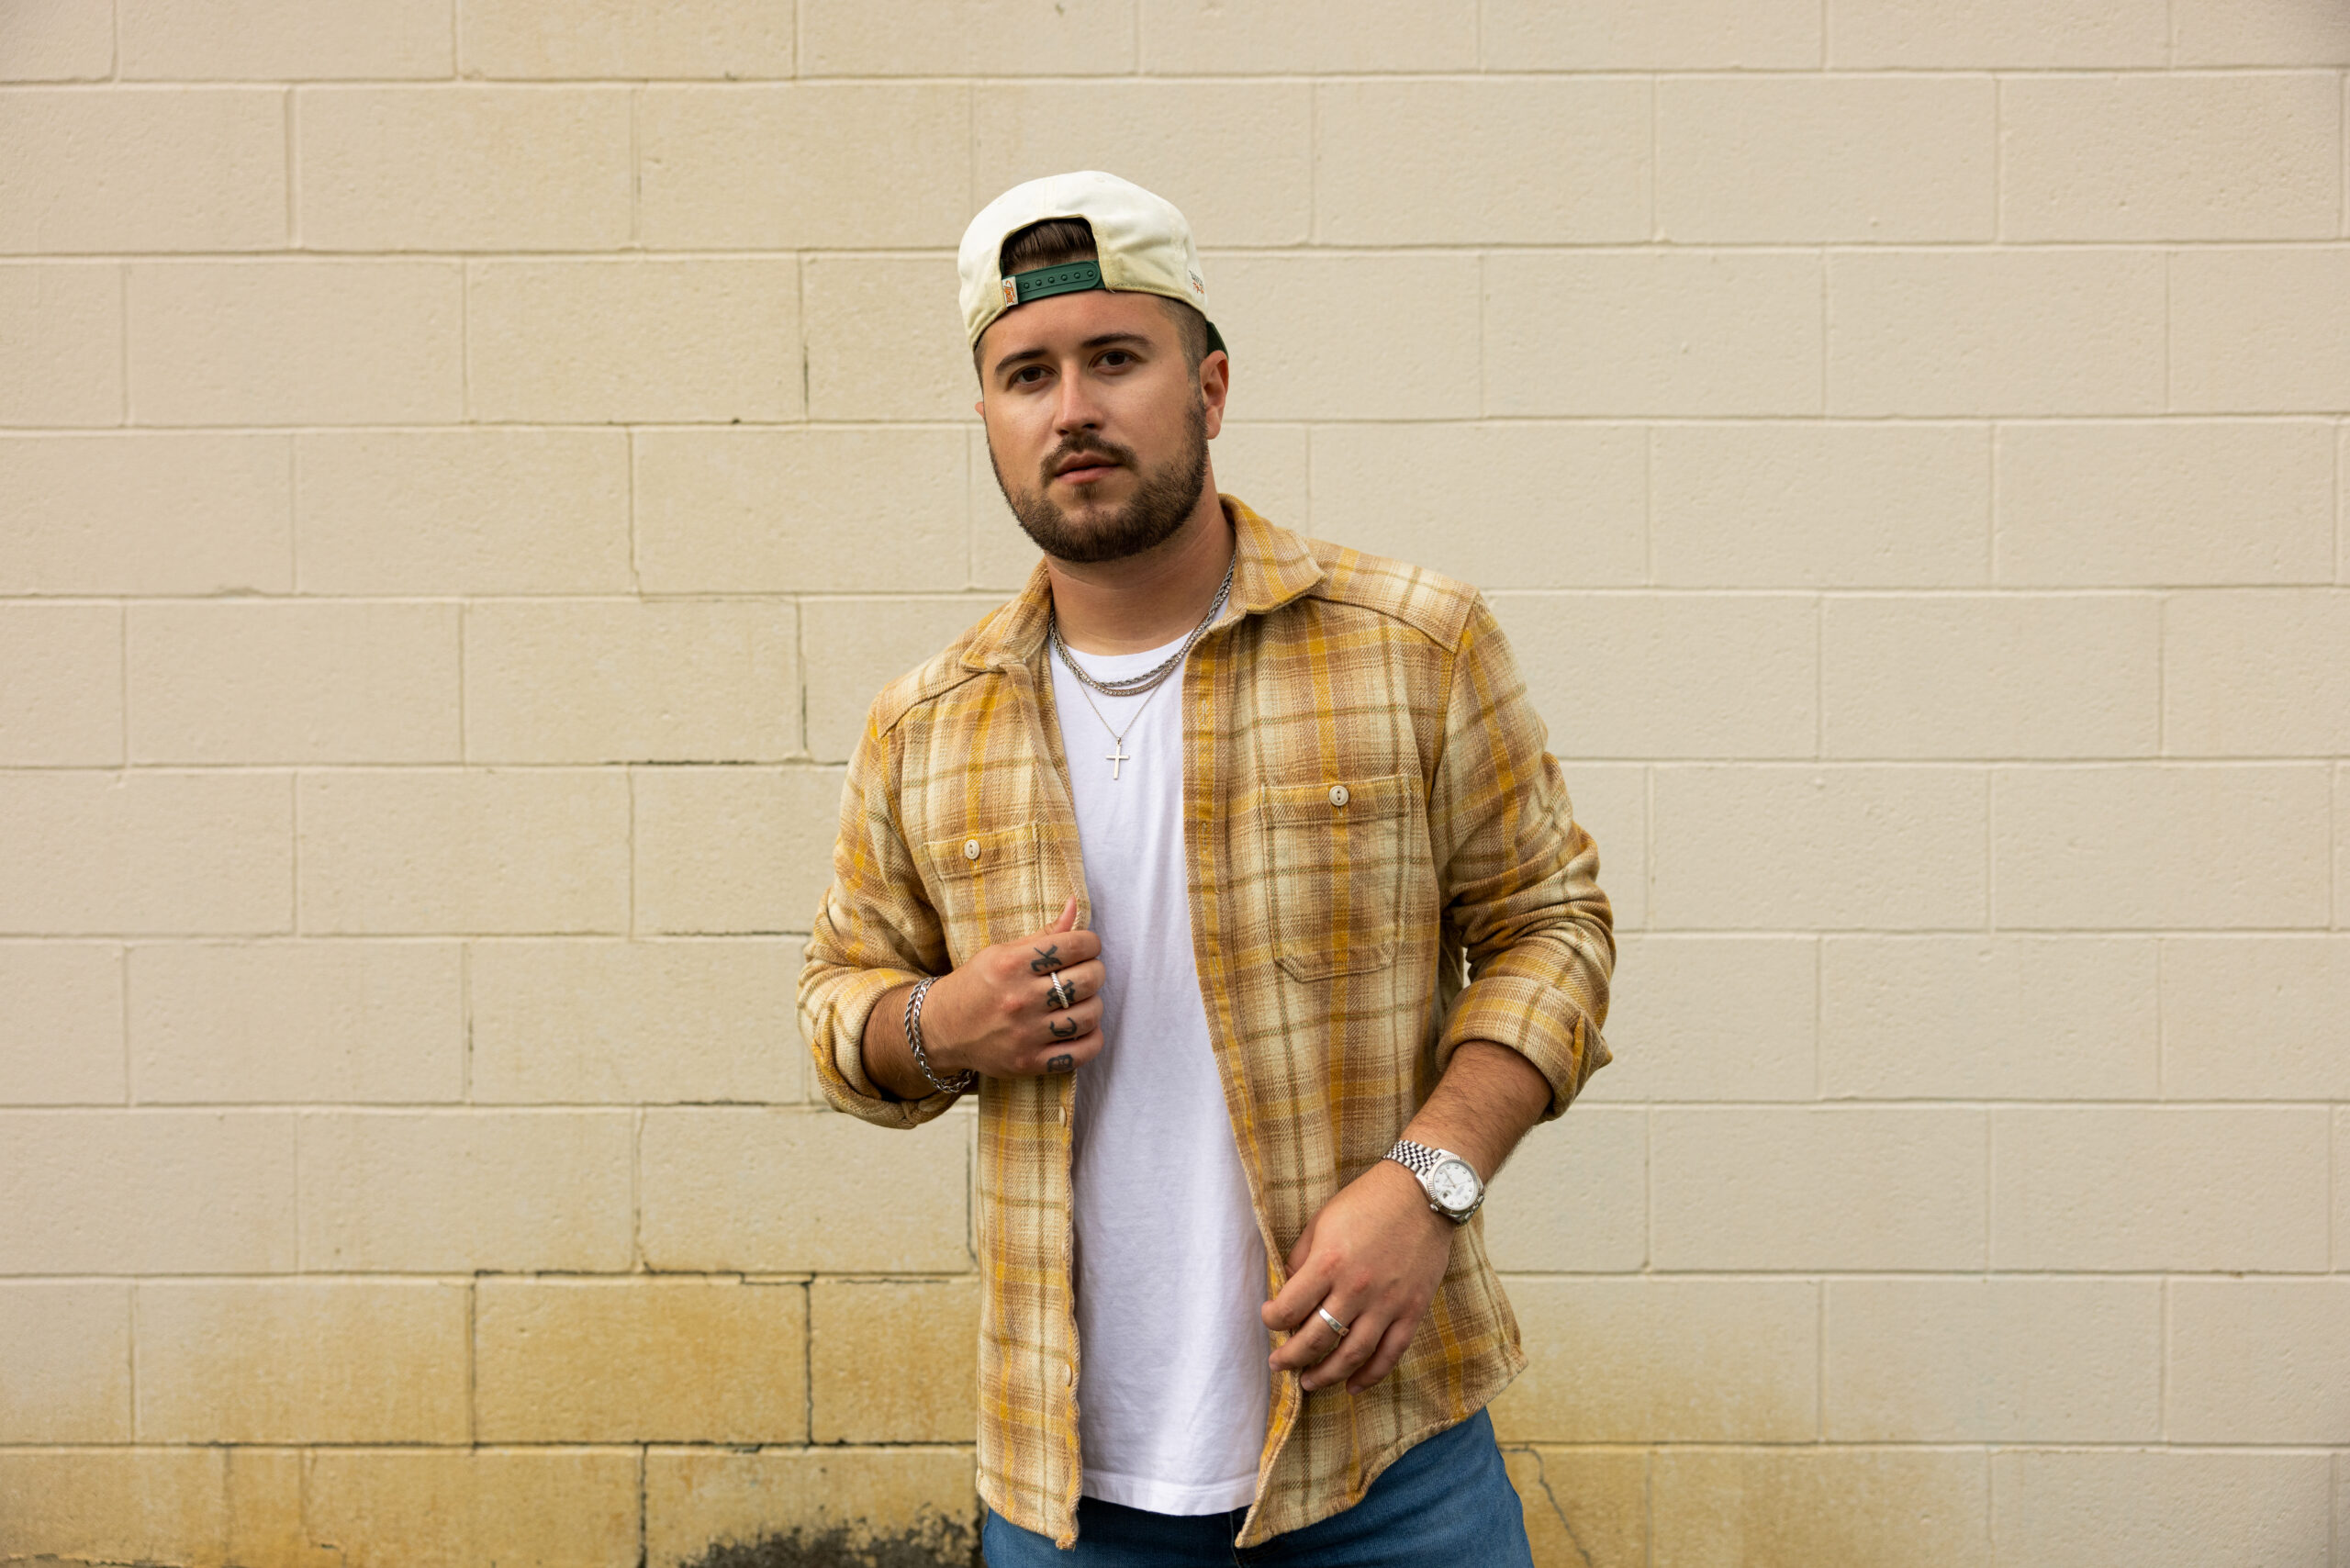 Dylan Schneider Confesses Tumultuous Relationship With Father In New Single “Daddy Drinks Whiskey” (Listen)